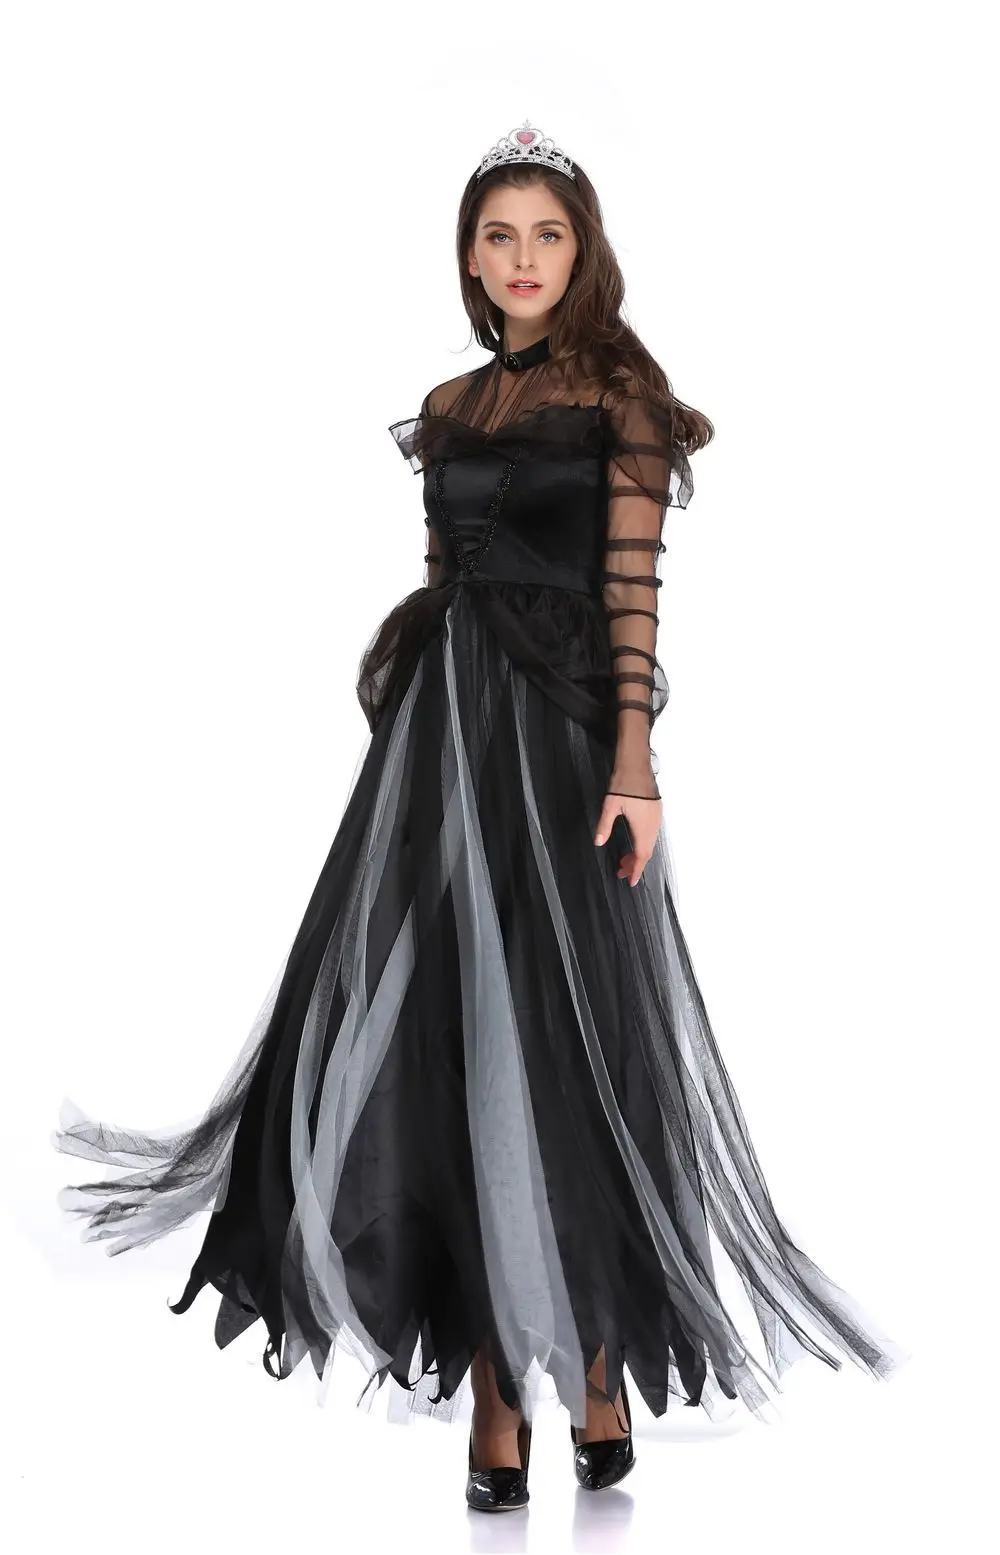 tack Sporvogn frakobling Halloween Womens Black Swan Dress Cosplay Fancy Dress Cosplay Outfit  Carnival Costume SM1905|Movie & TV costumes| - AliExpress